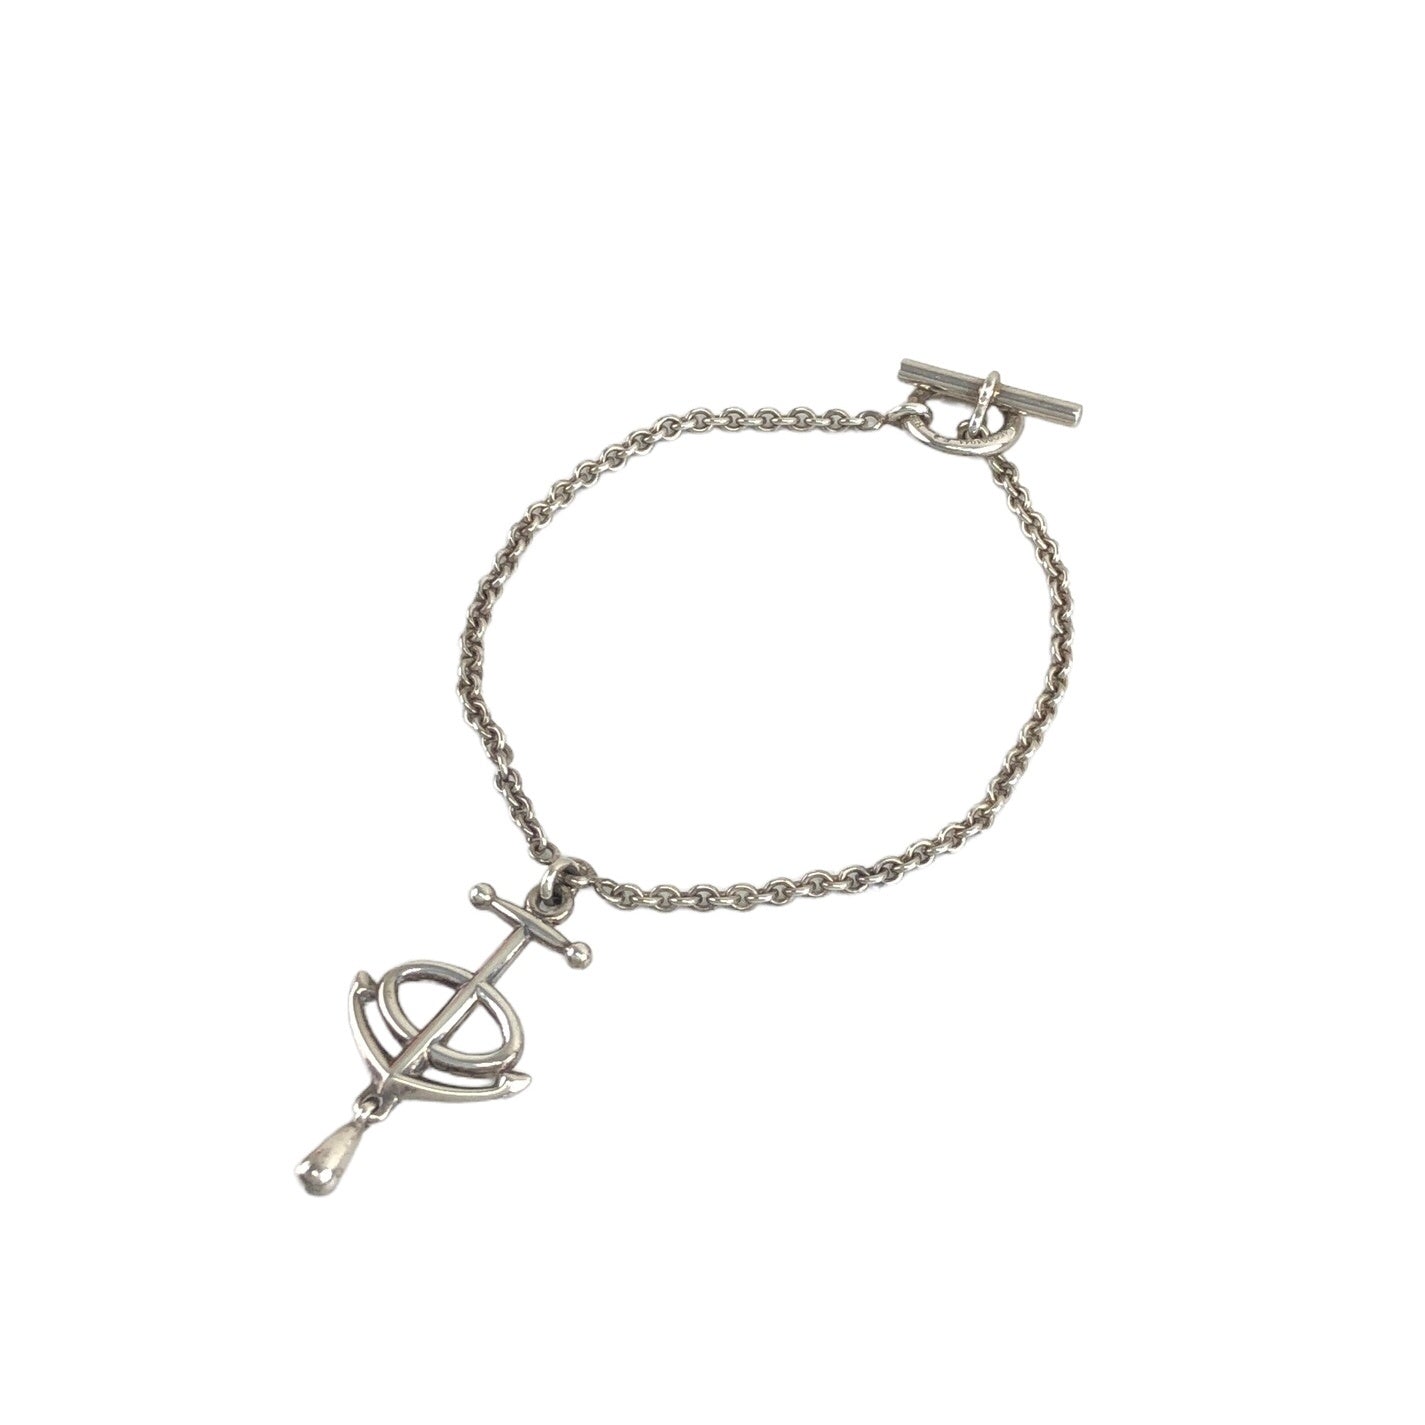 HERMES Chaine d'ancre Bracelet Silver Vintage 925 5xaa46